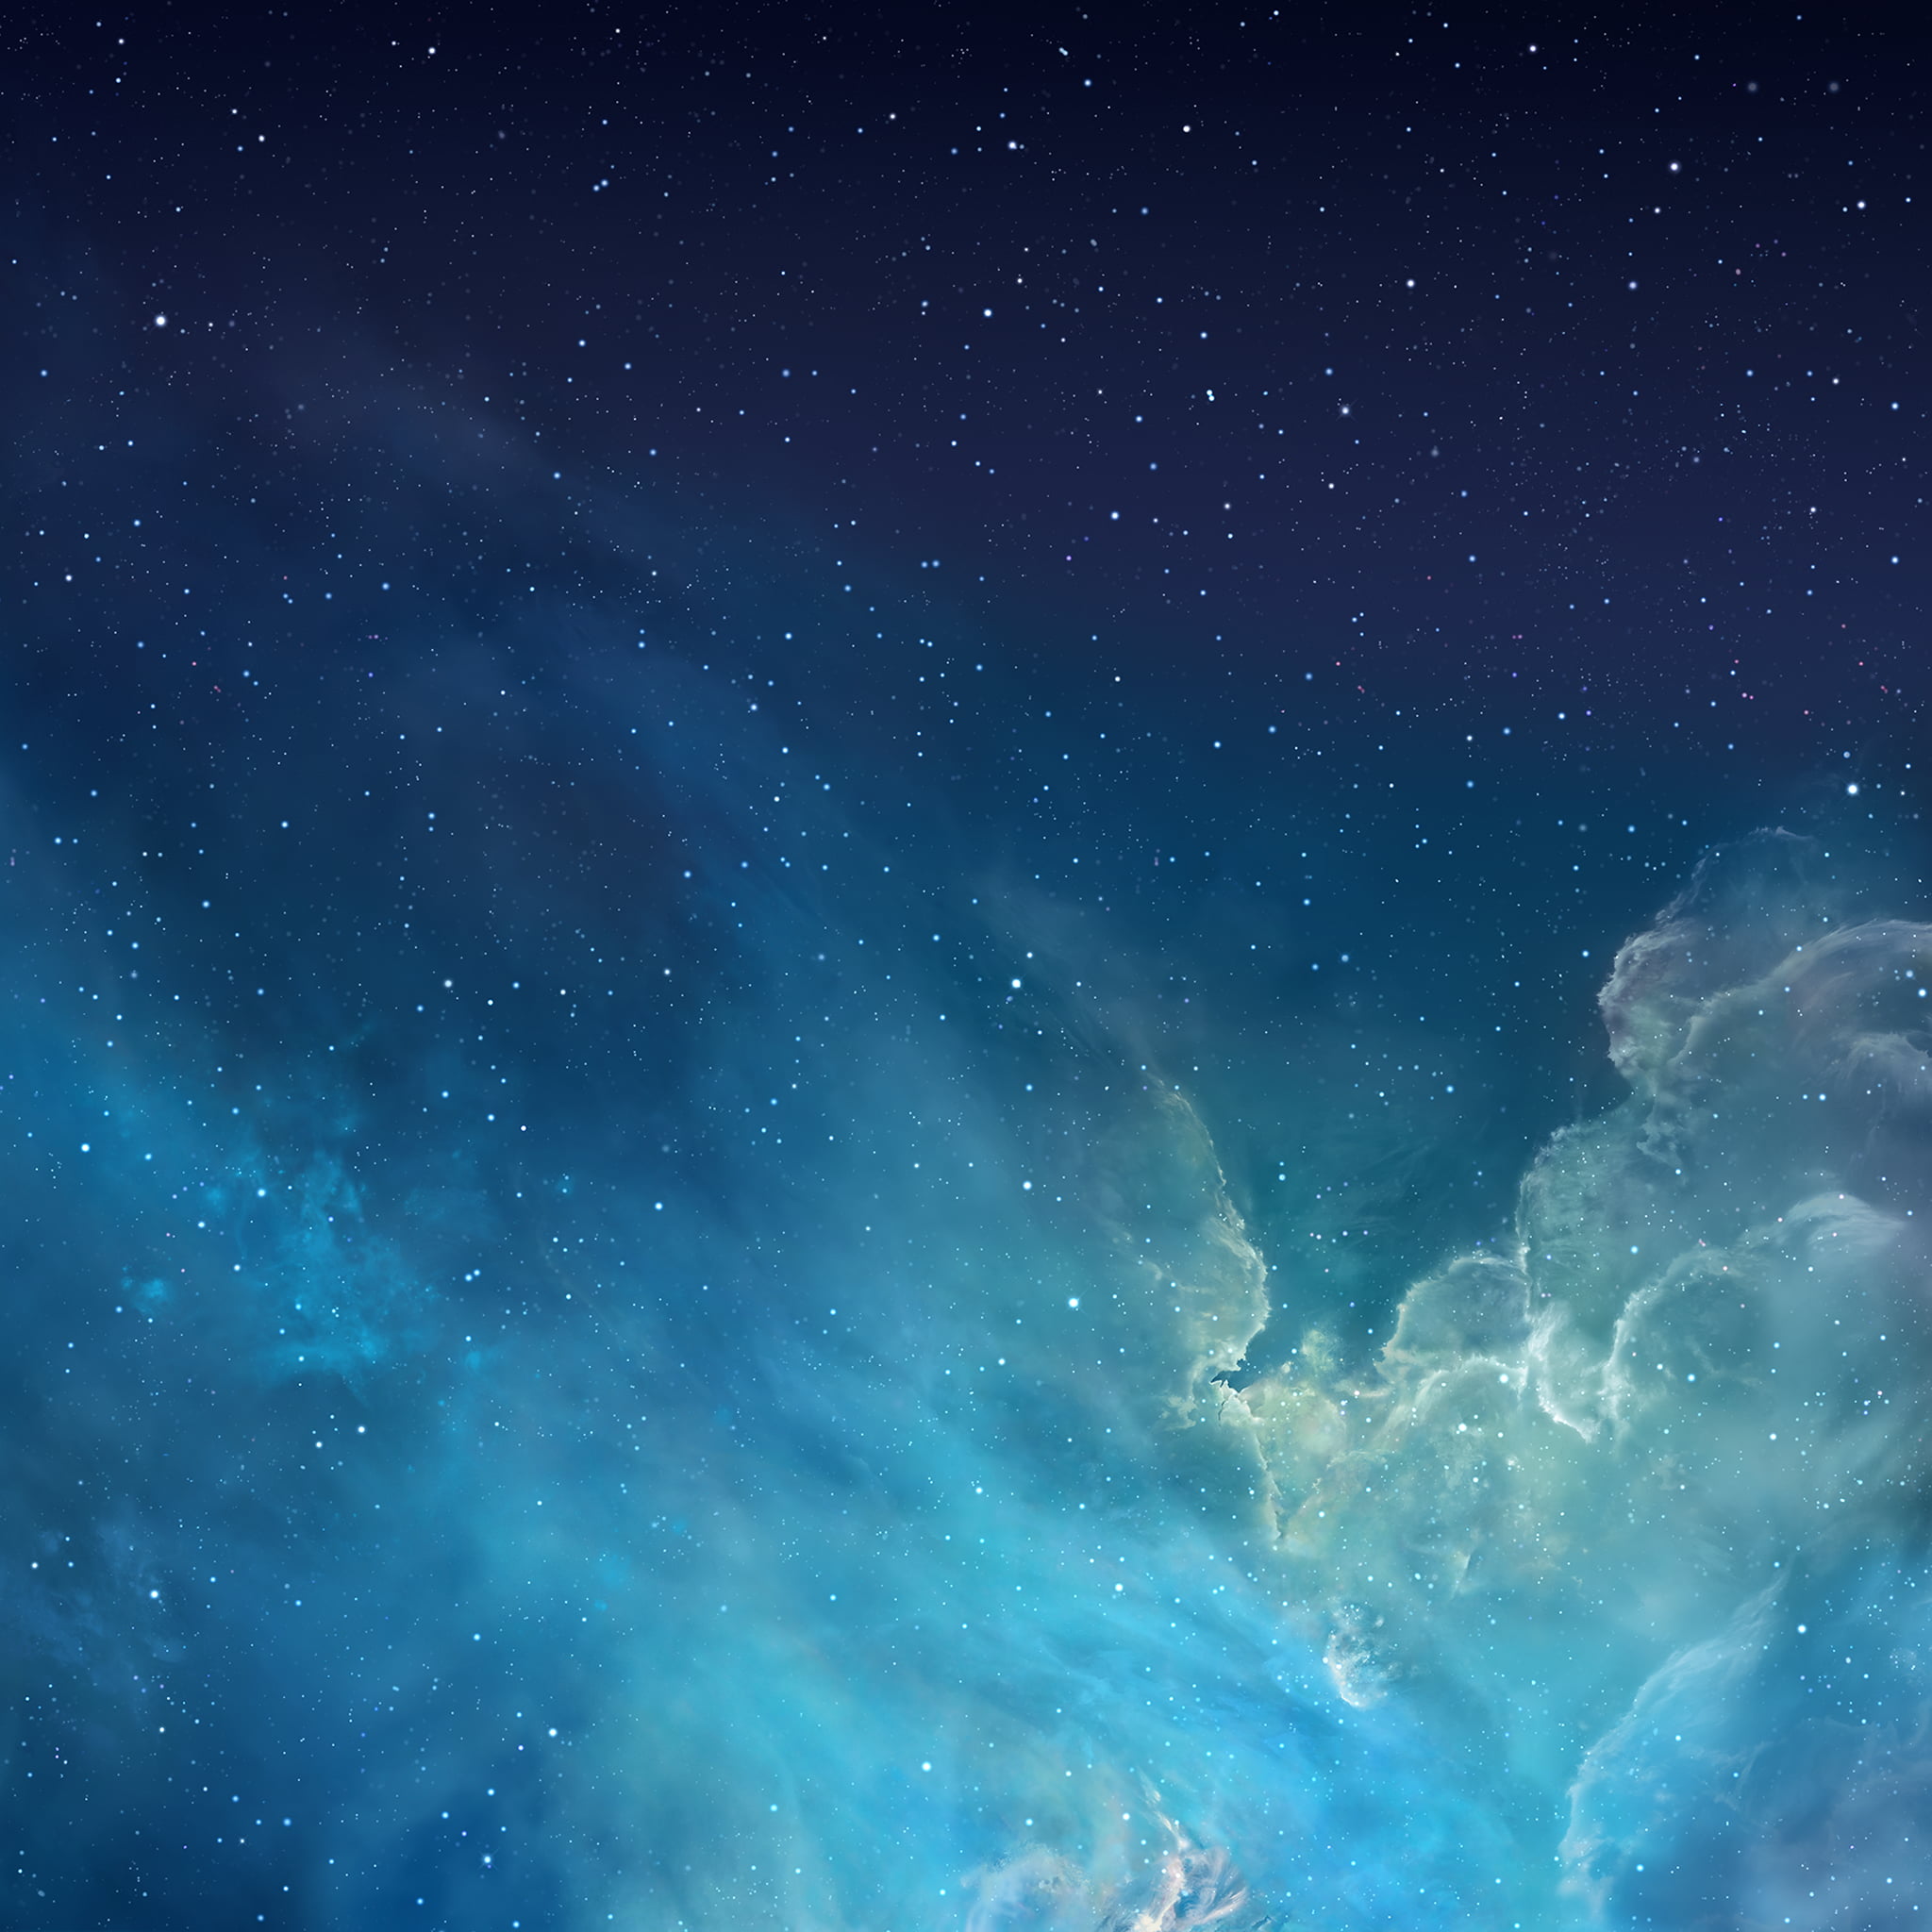 white and blue clouds illustration, blue and teal nebula, Apple Inc.